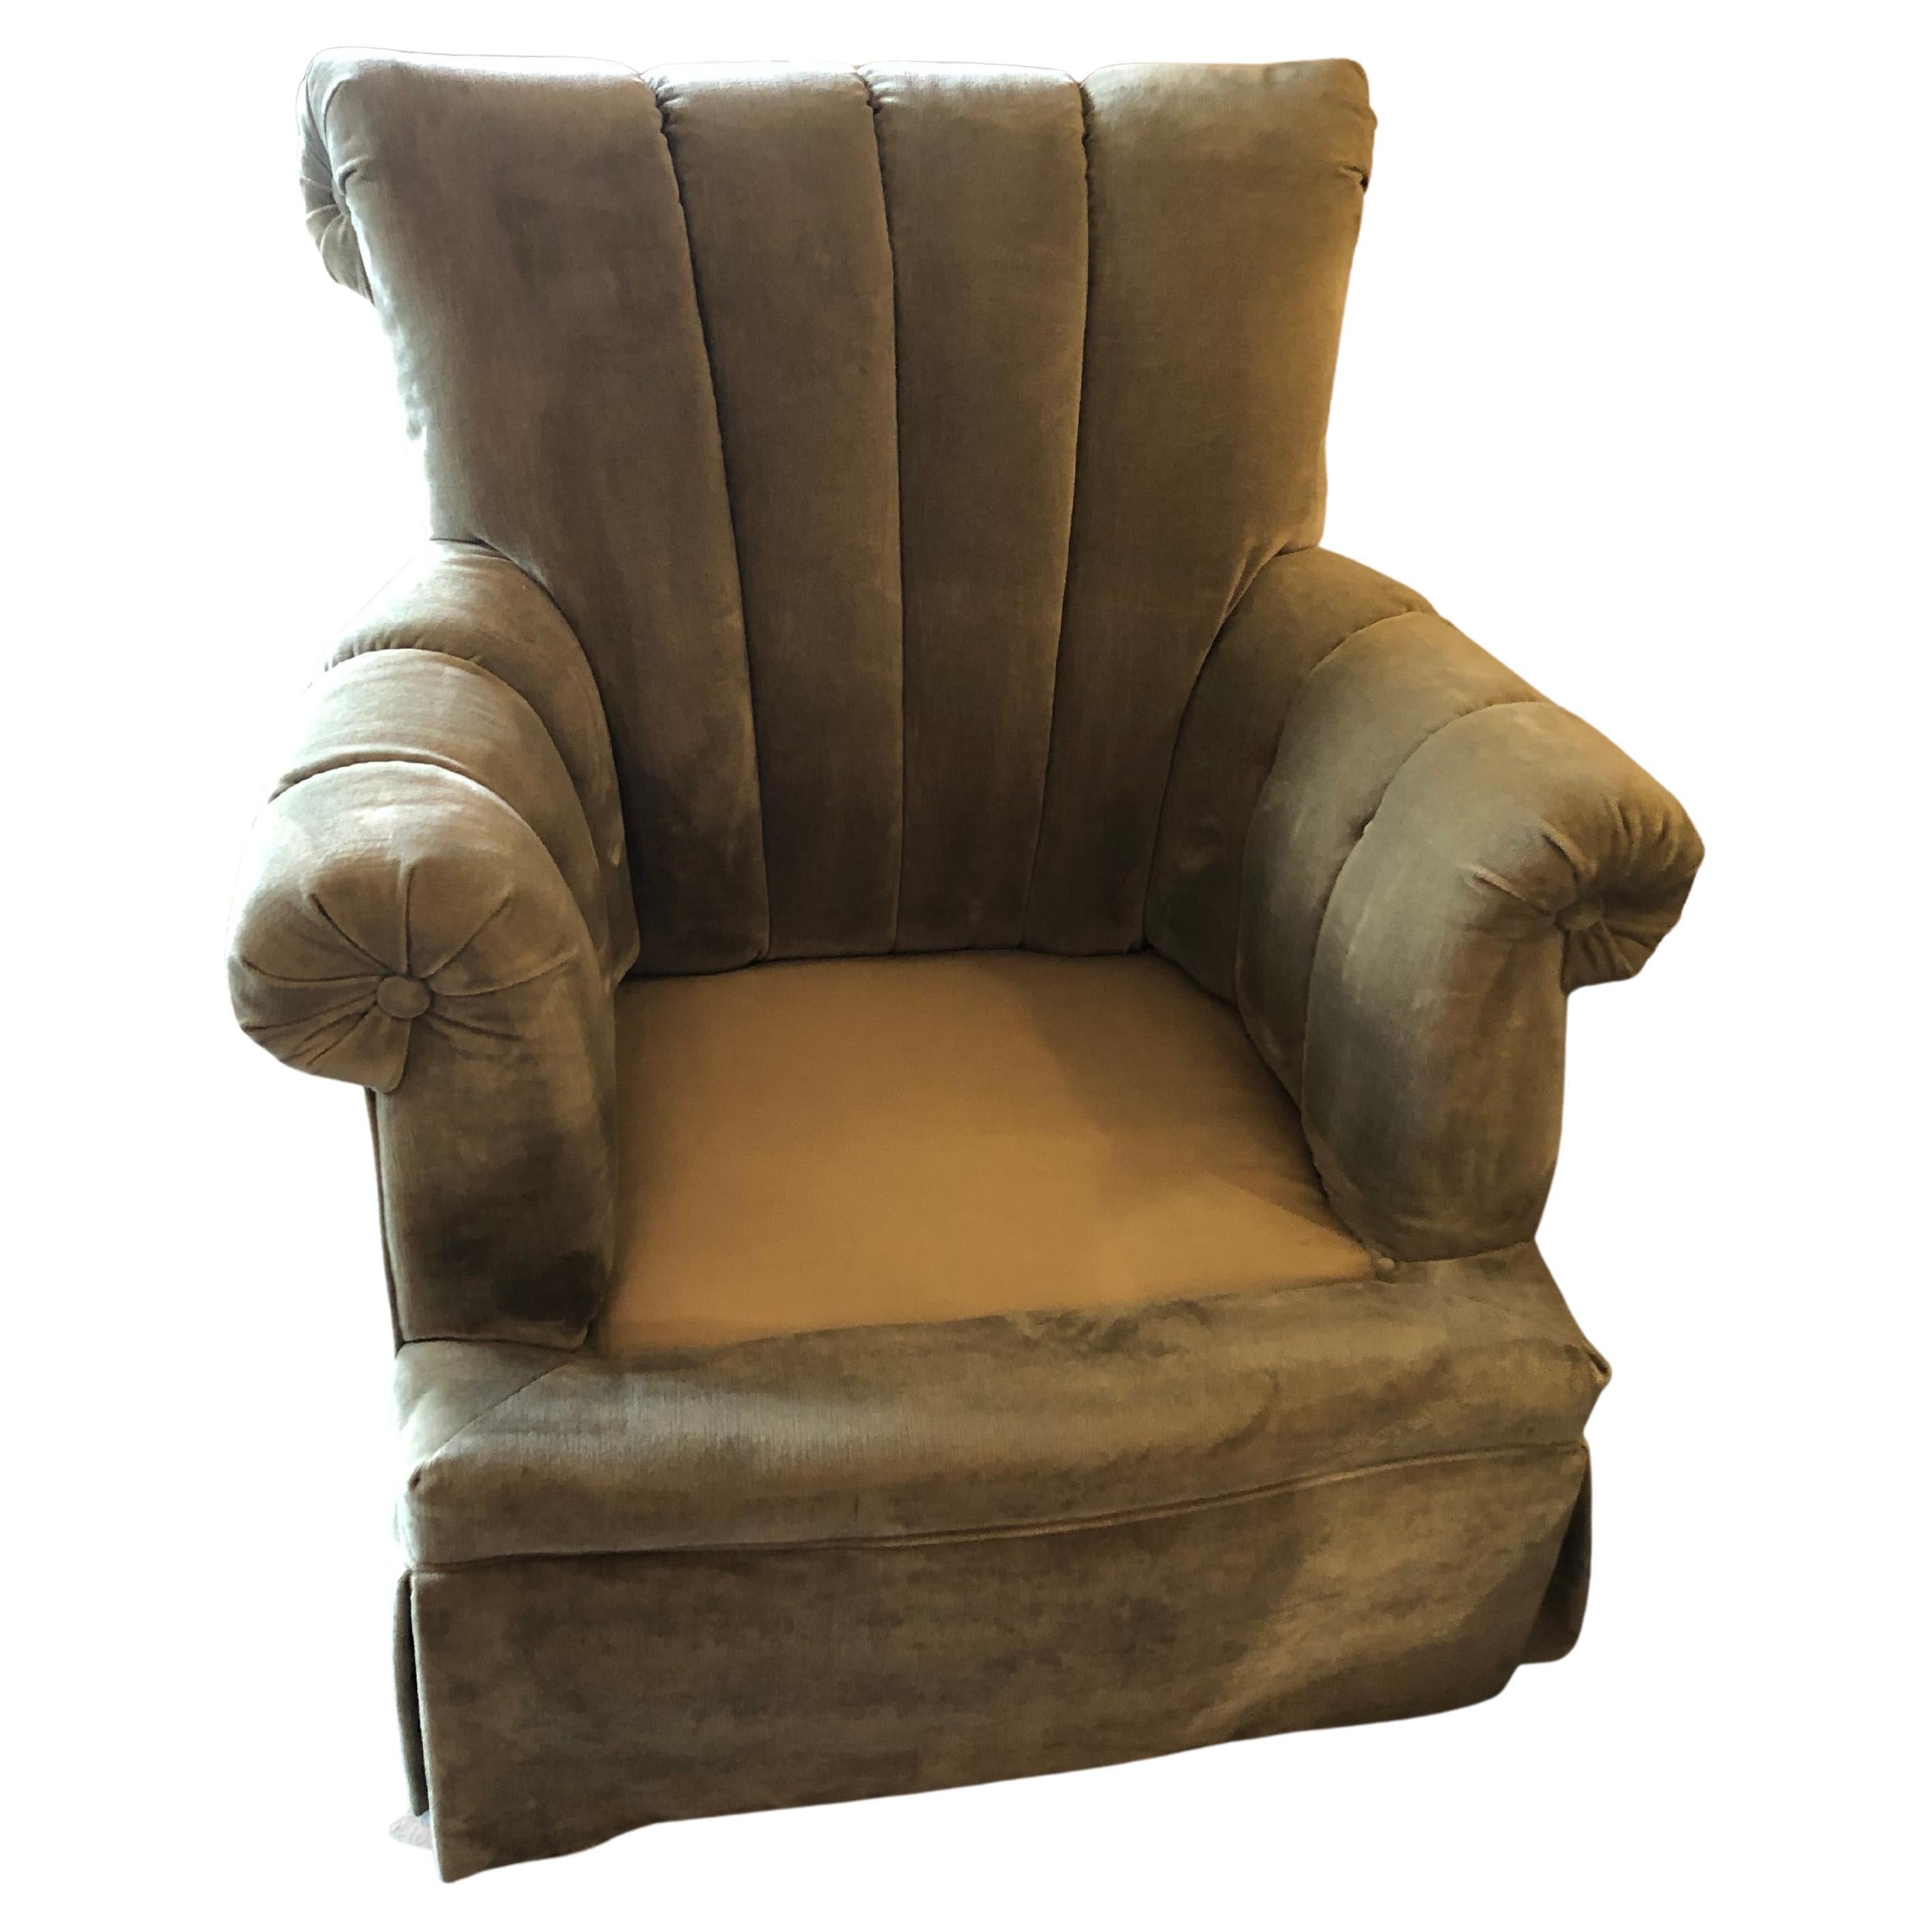 Super dreamy plush comfortable and large pair of celadon green velvet upholstered club chairs having channel backs,  scrolled arms with tufted central button, and handsome box pleated skirts.  
Arm to arm 36 w
32